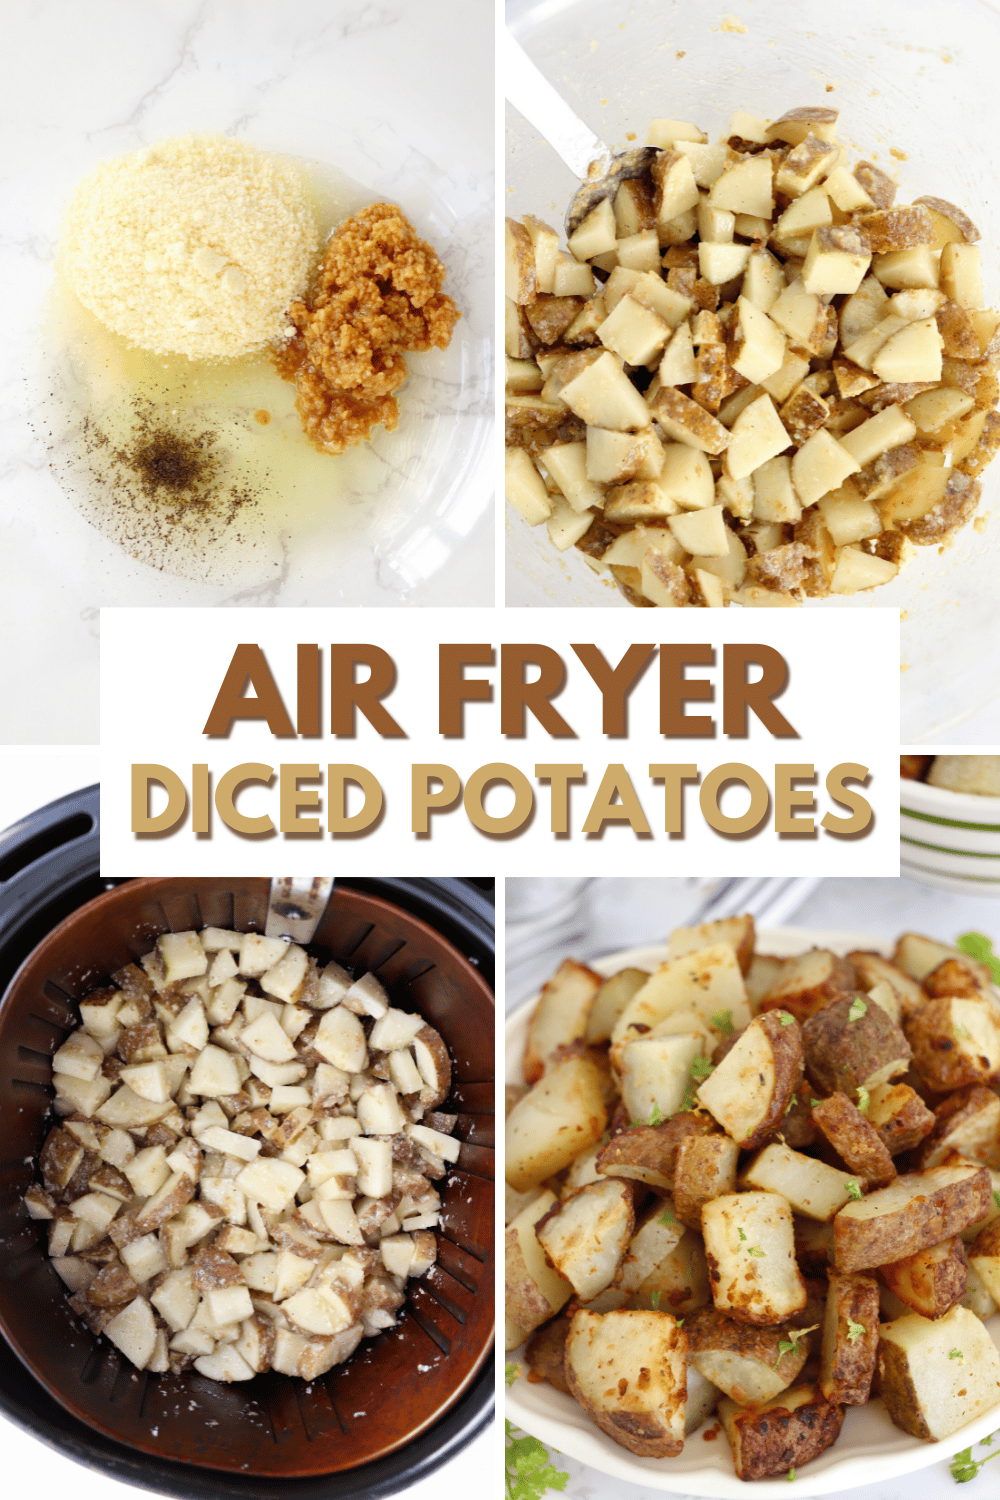 These Air Fryer Diced Potatoes are crispy, flavorful potatoes cooked to perfection in the air fryer. It's a family-friendly side dish recipe! #airfryerdicedpotatoes #airfryerpotatoes #airfryer #potatoes via @wondermomwannab